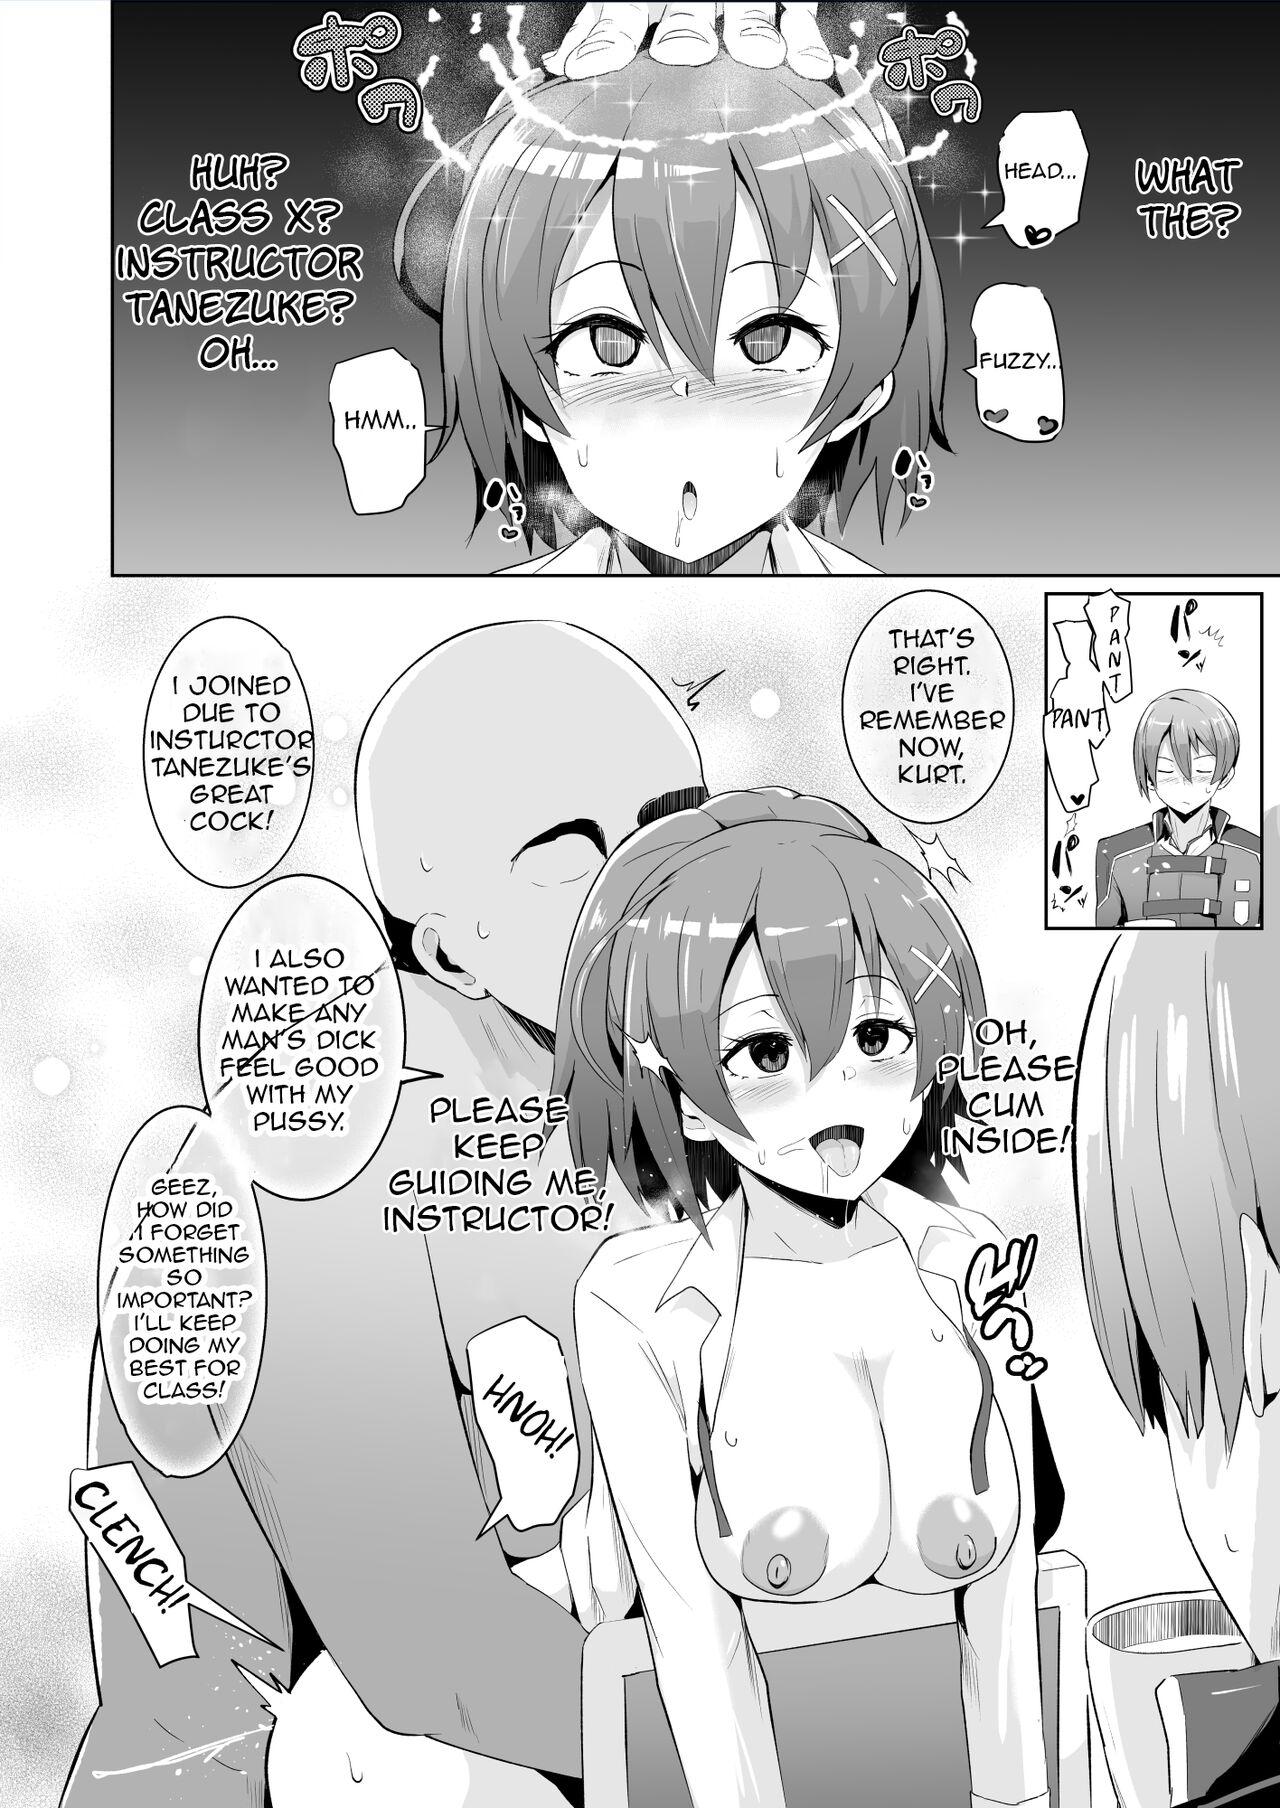 Police Hypnosis of the New Class VII - The legend of heroes | eiyuu densetsu Gay Pornstar - Page 3